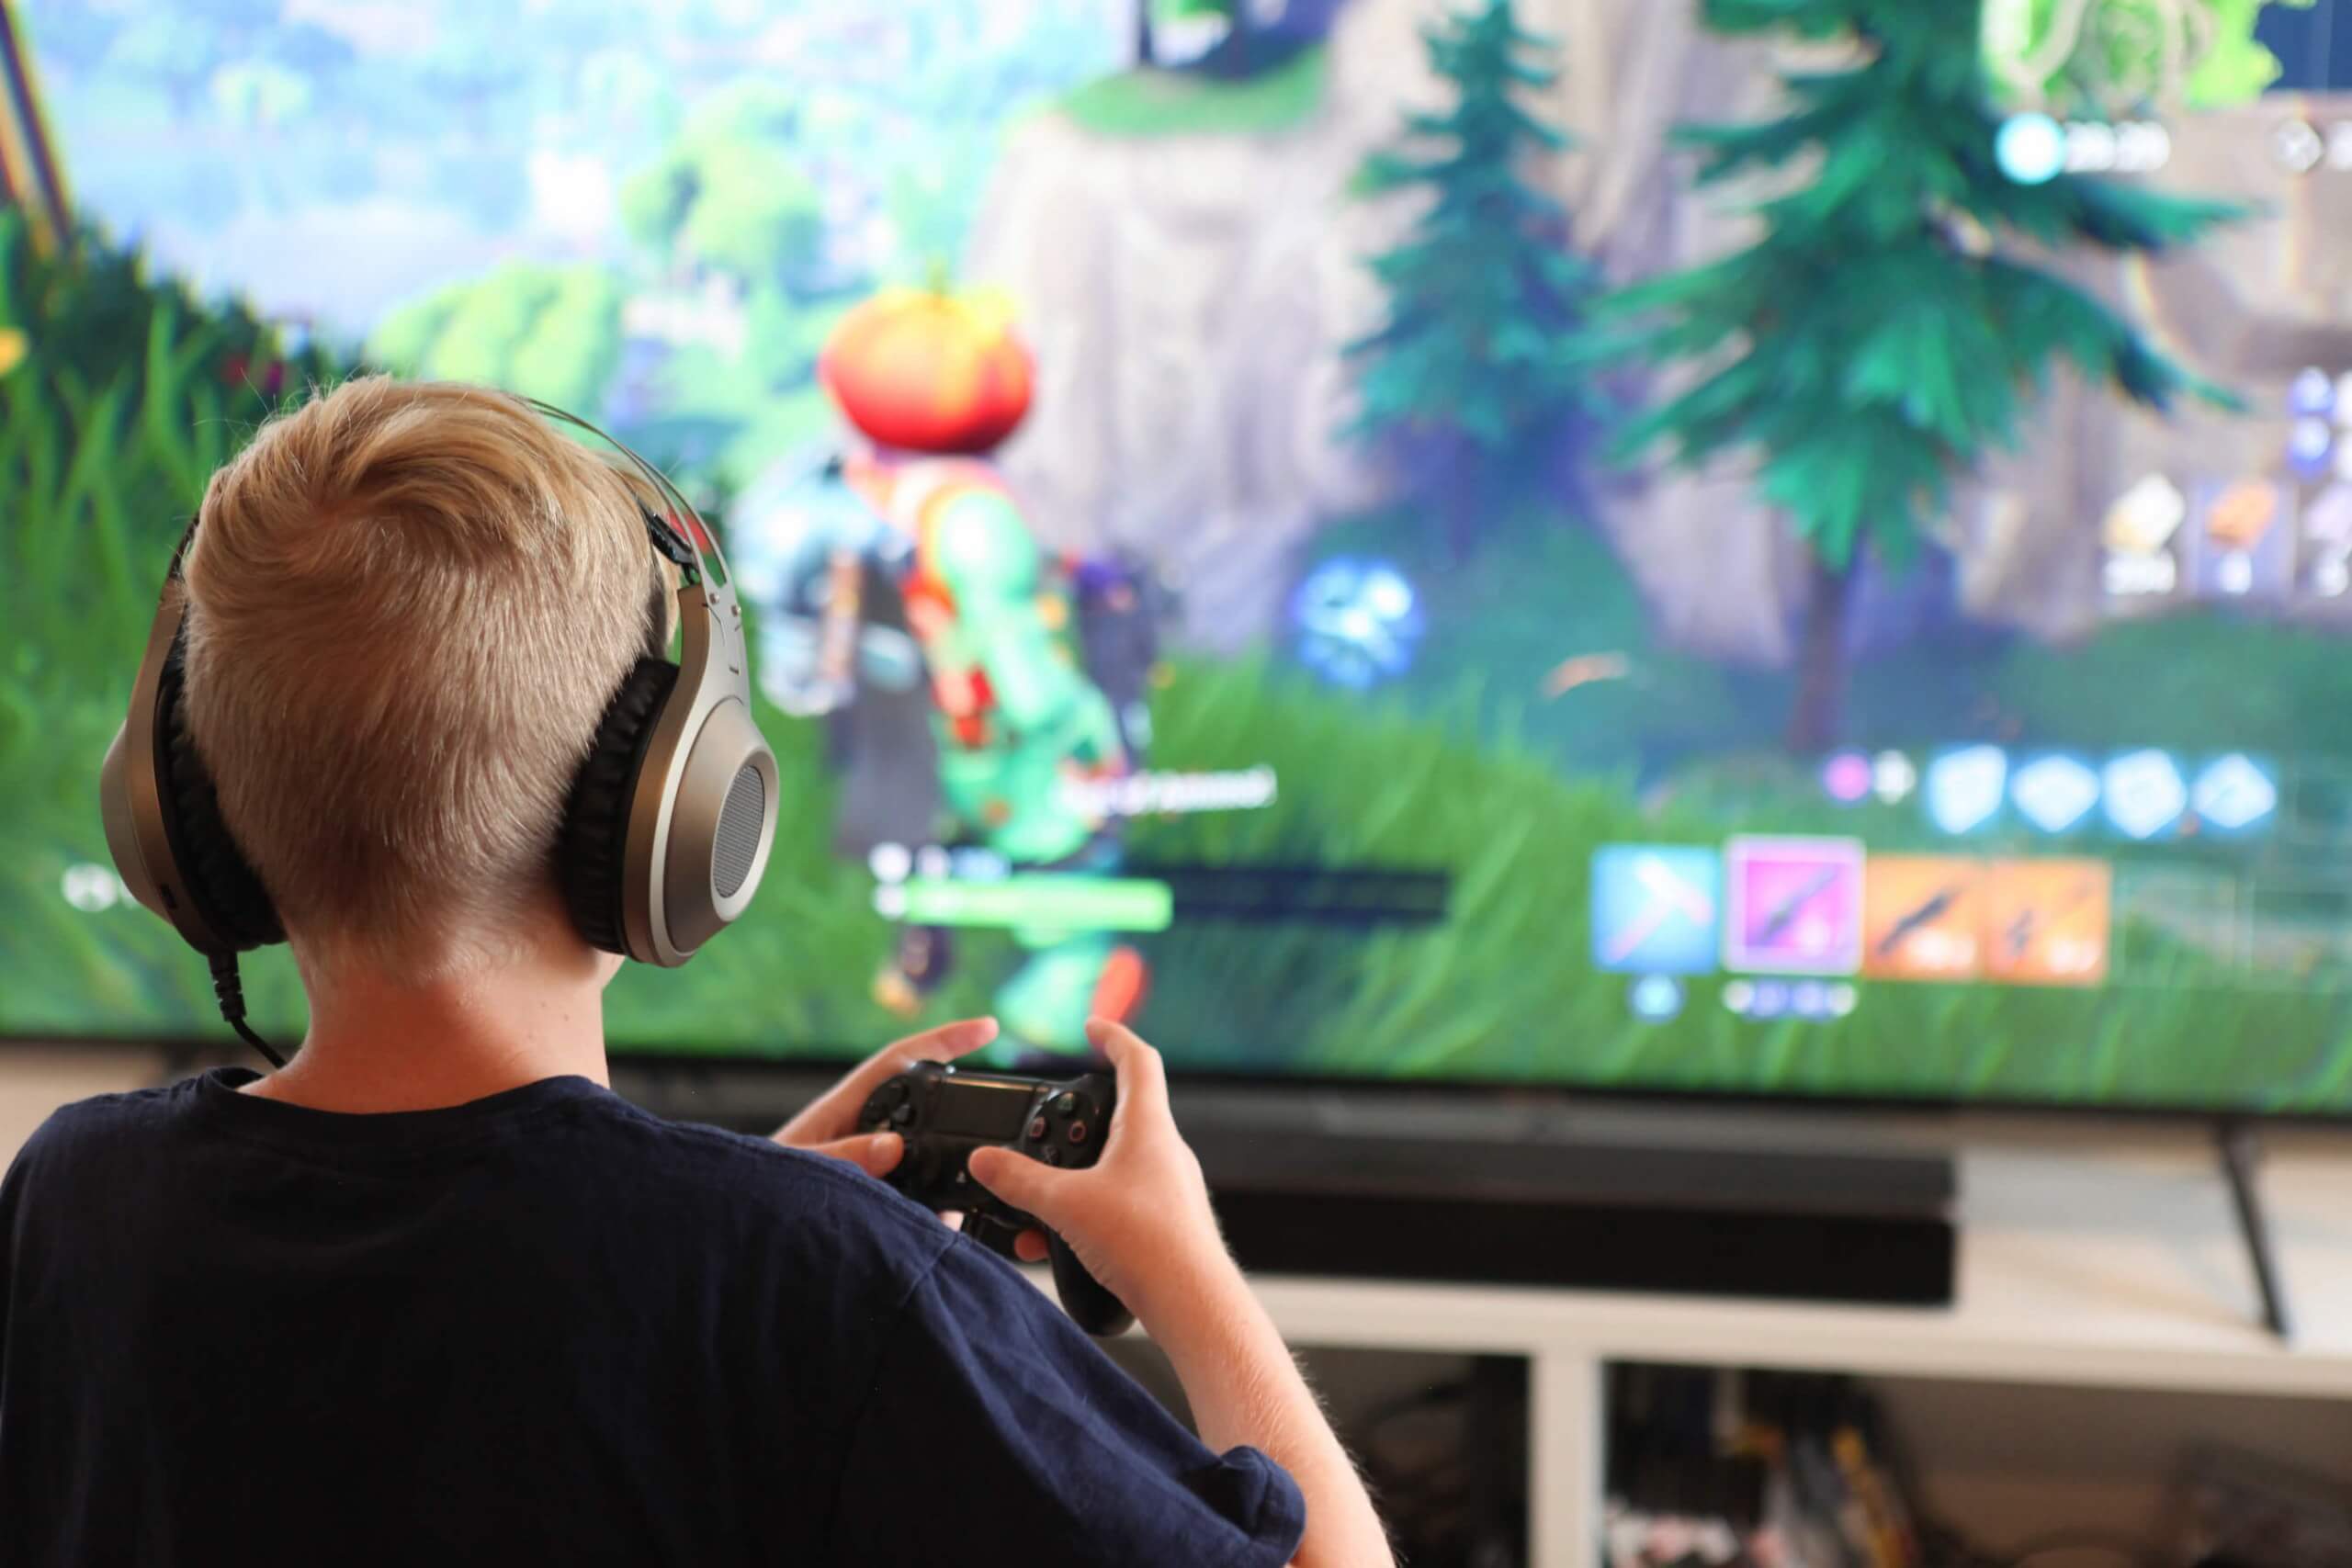 Epic makes Fortnite cross-play default for Xbox and PlayStation players